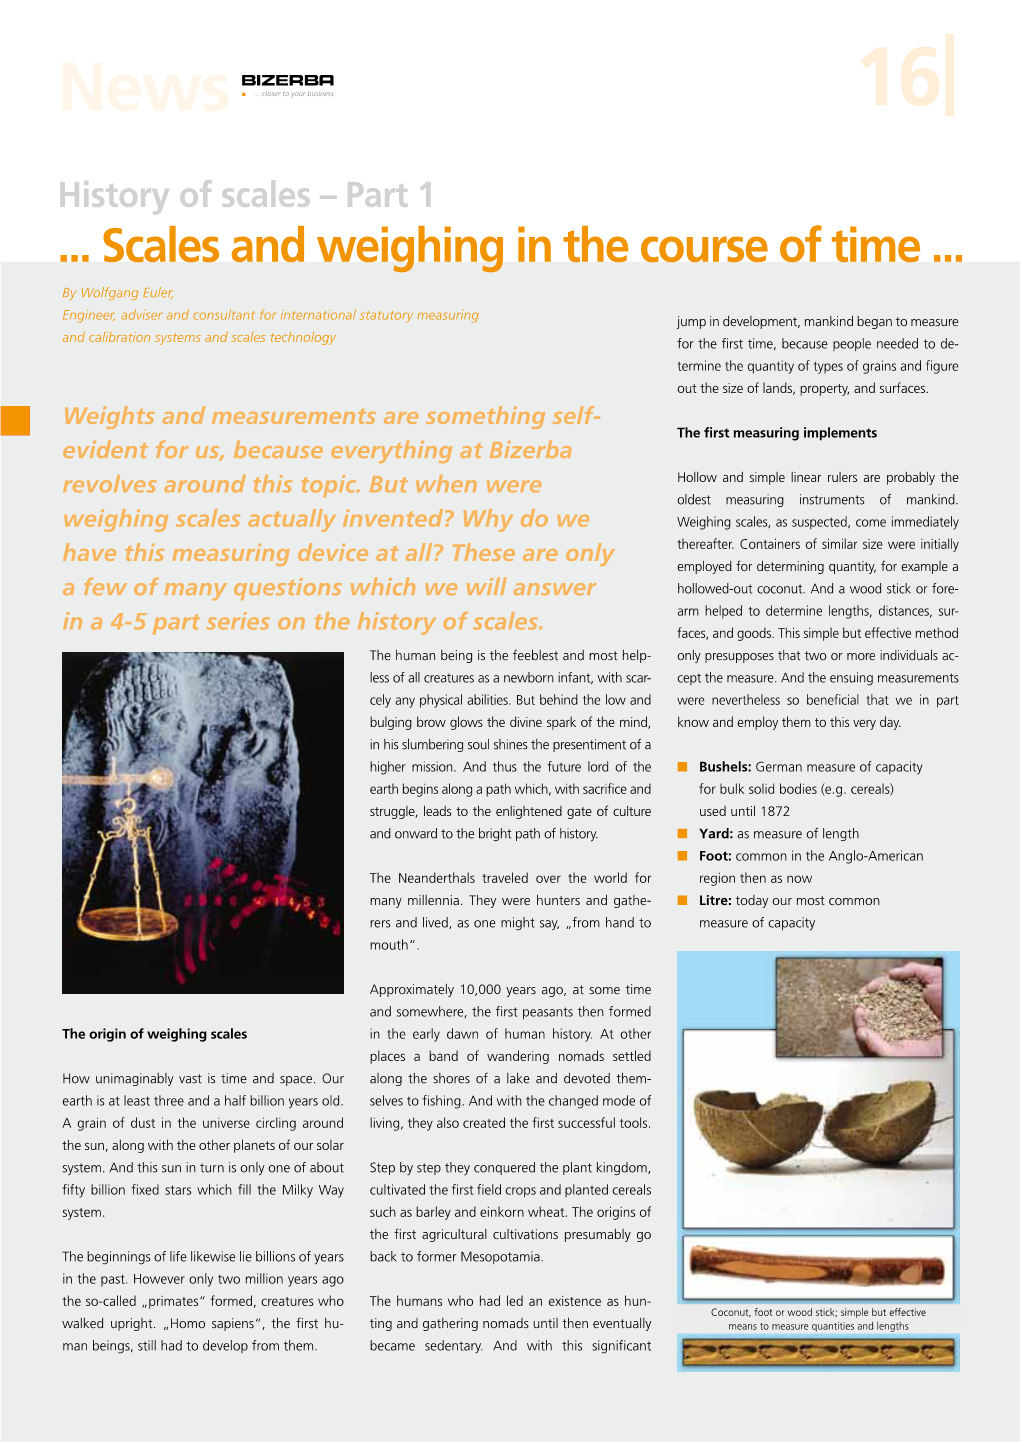 Scales and Weighing in the Course of Time